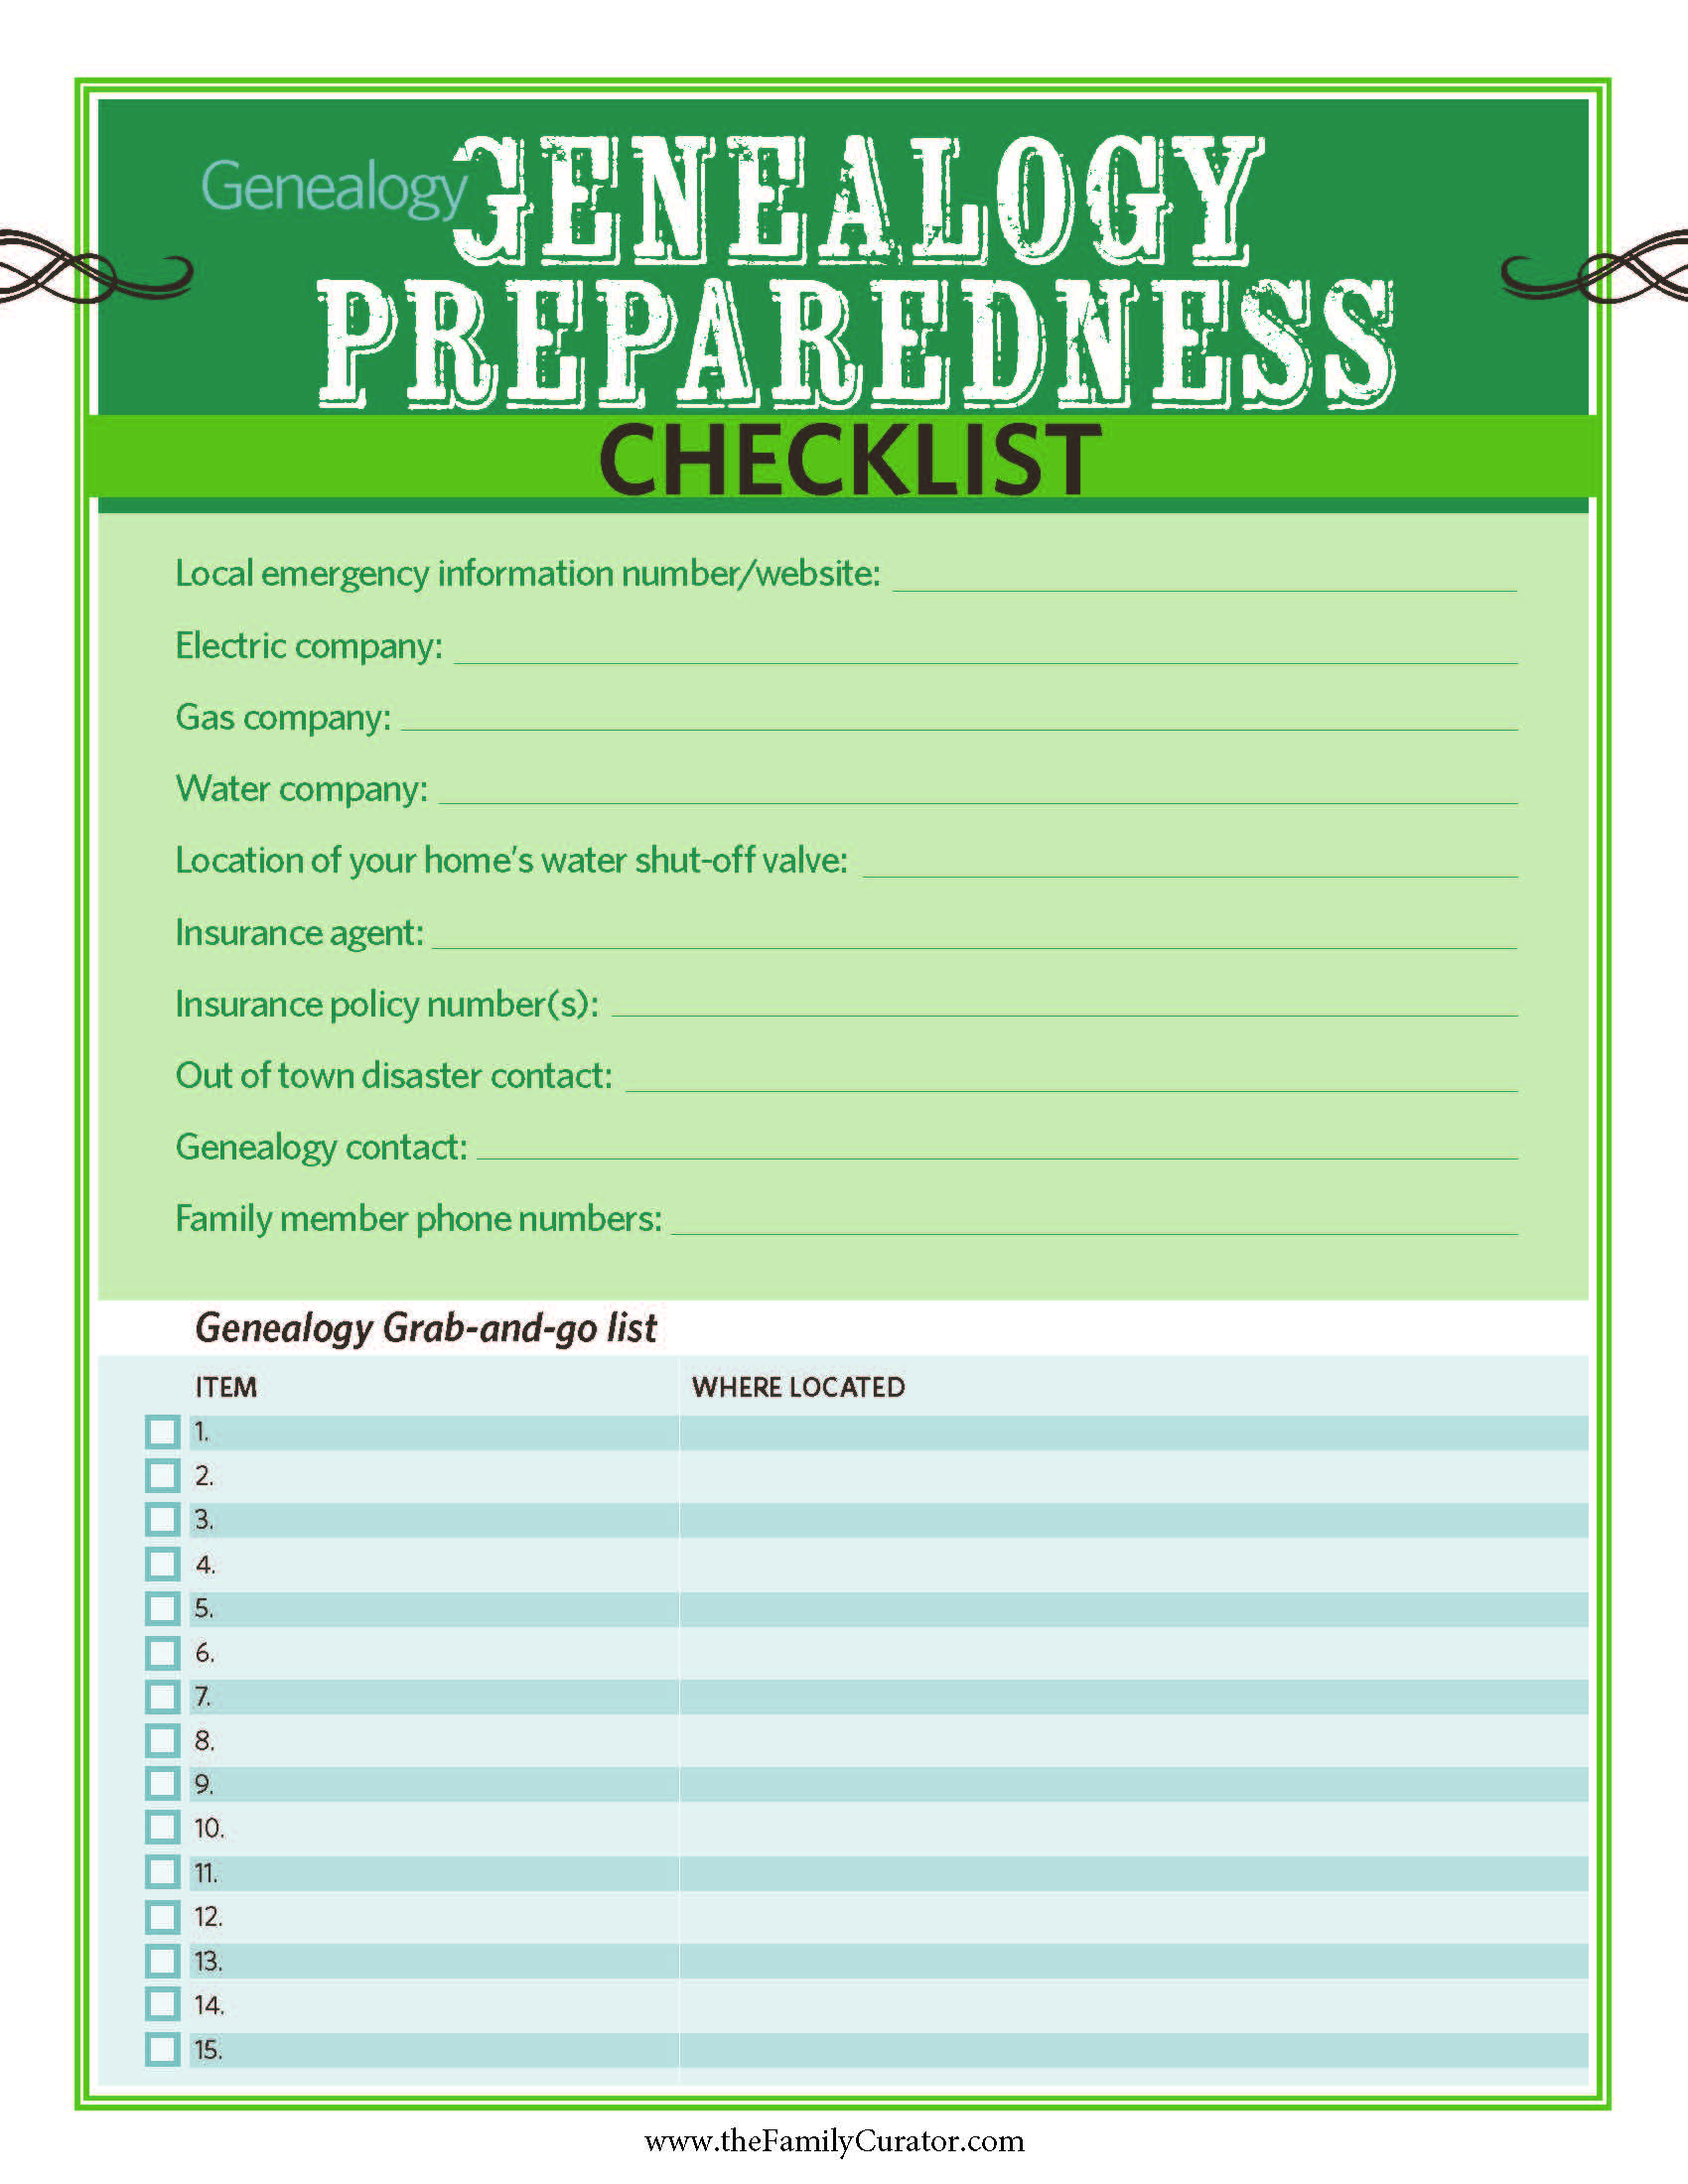 Be Prepared: Emergency Preparation Checklist for Families with